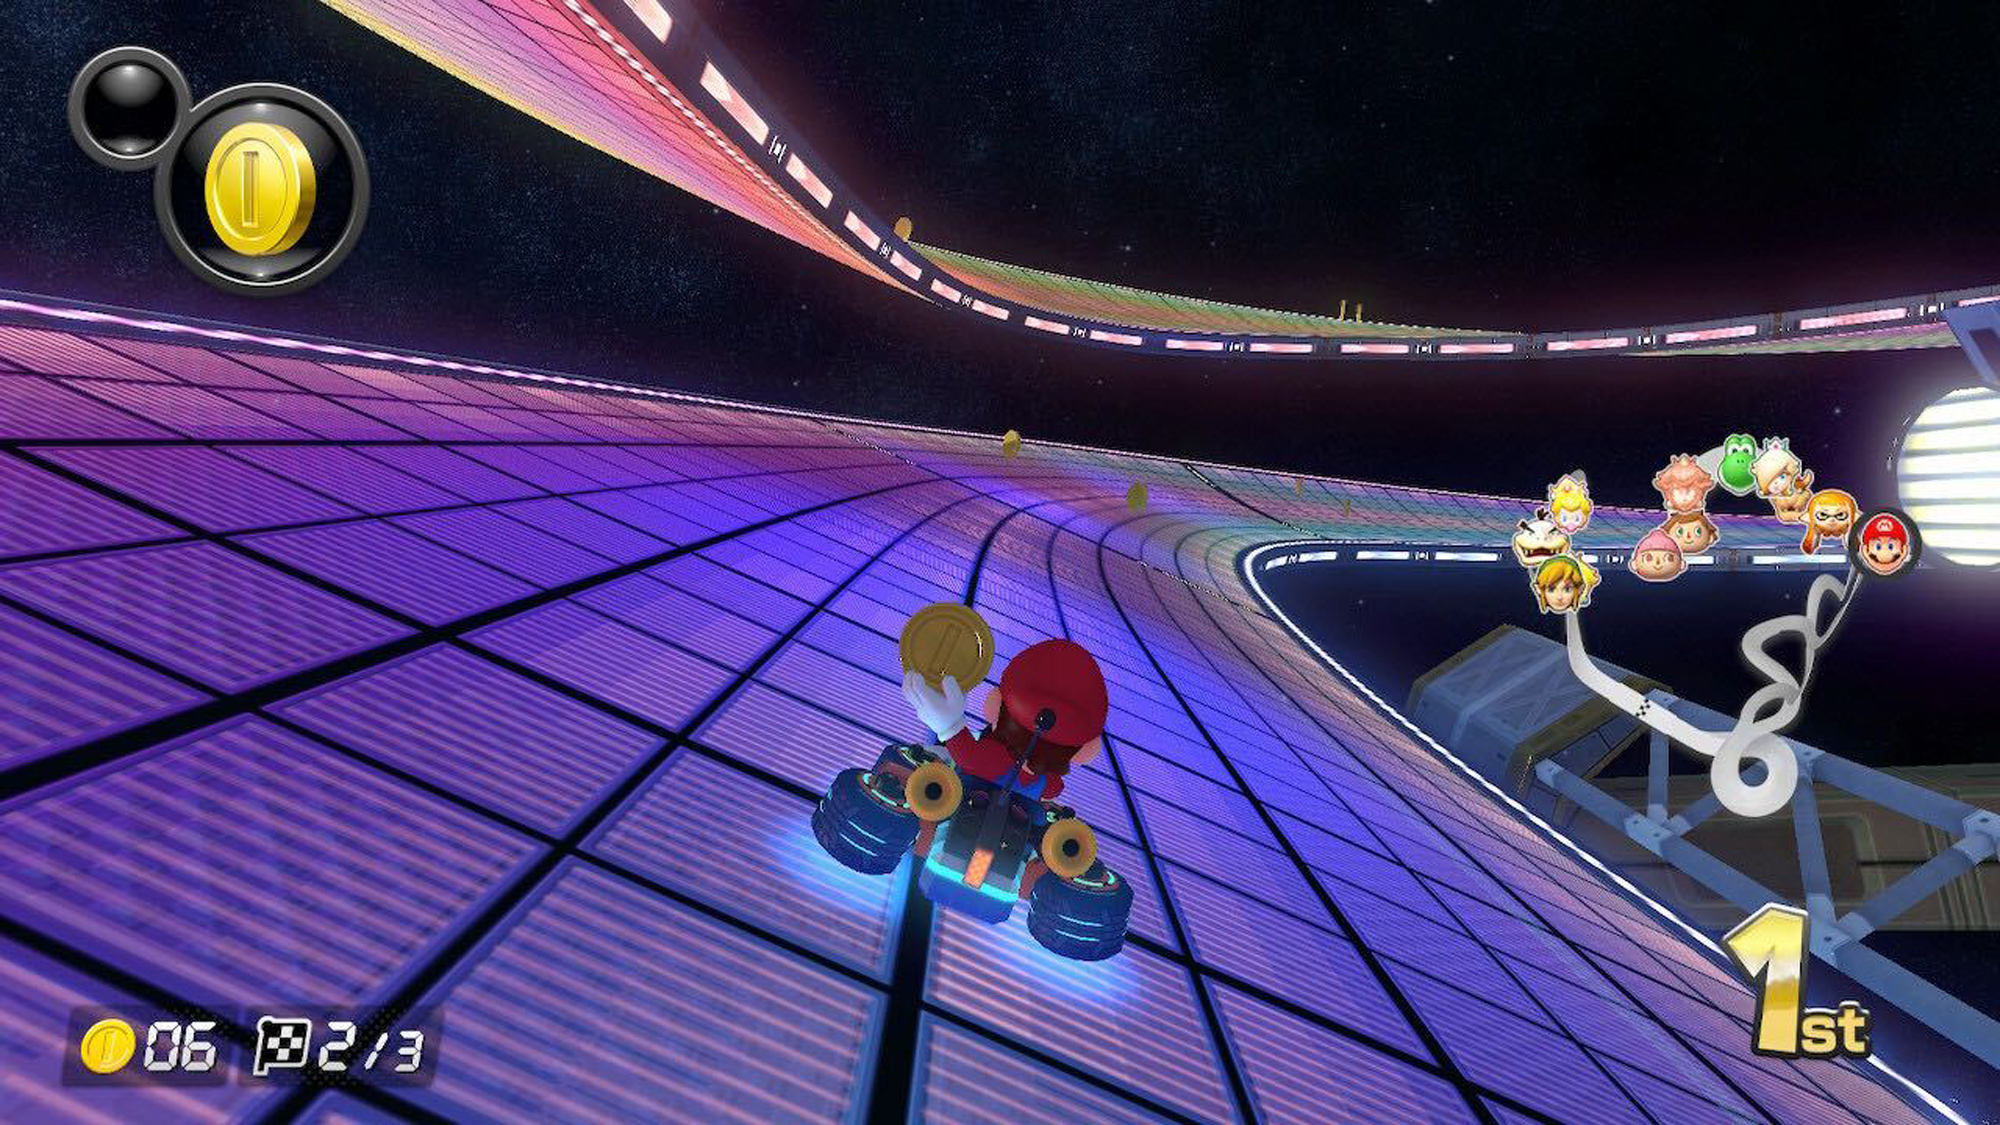 Could Mario Kart Teach Us How to Reduce World Poverty and Improve  Sustainability? | The Brink | Boston University